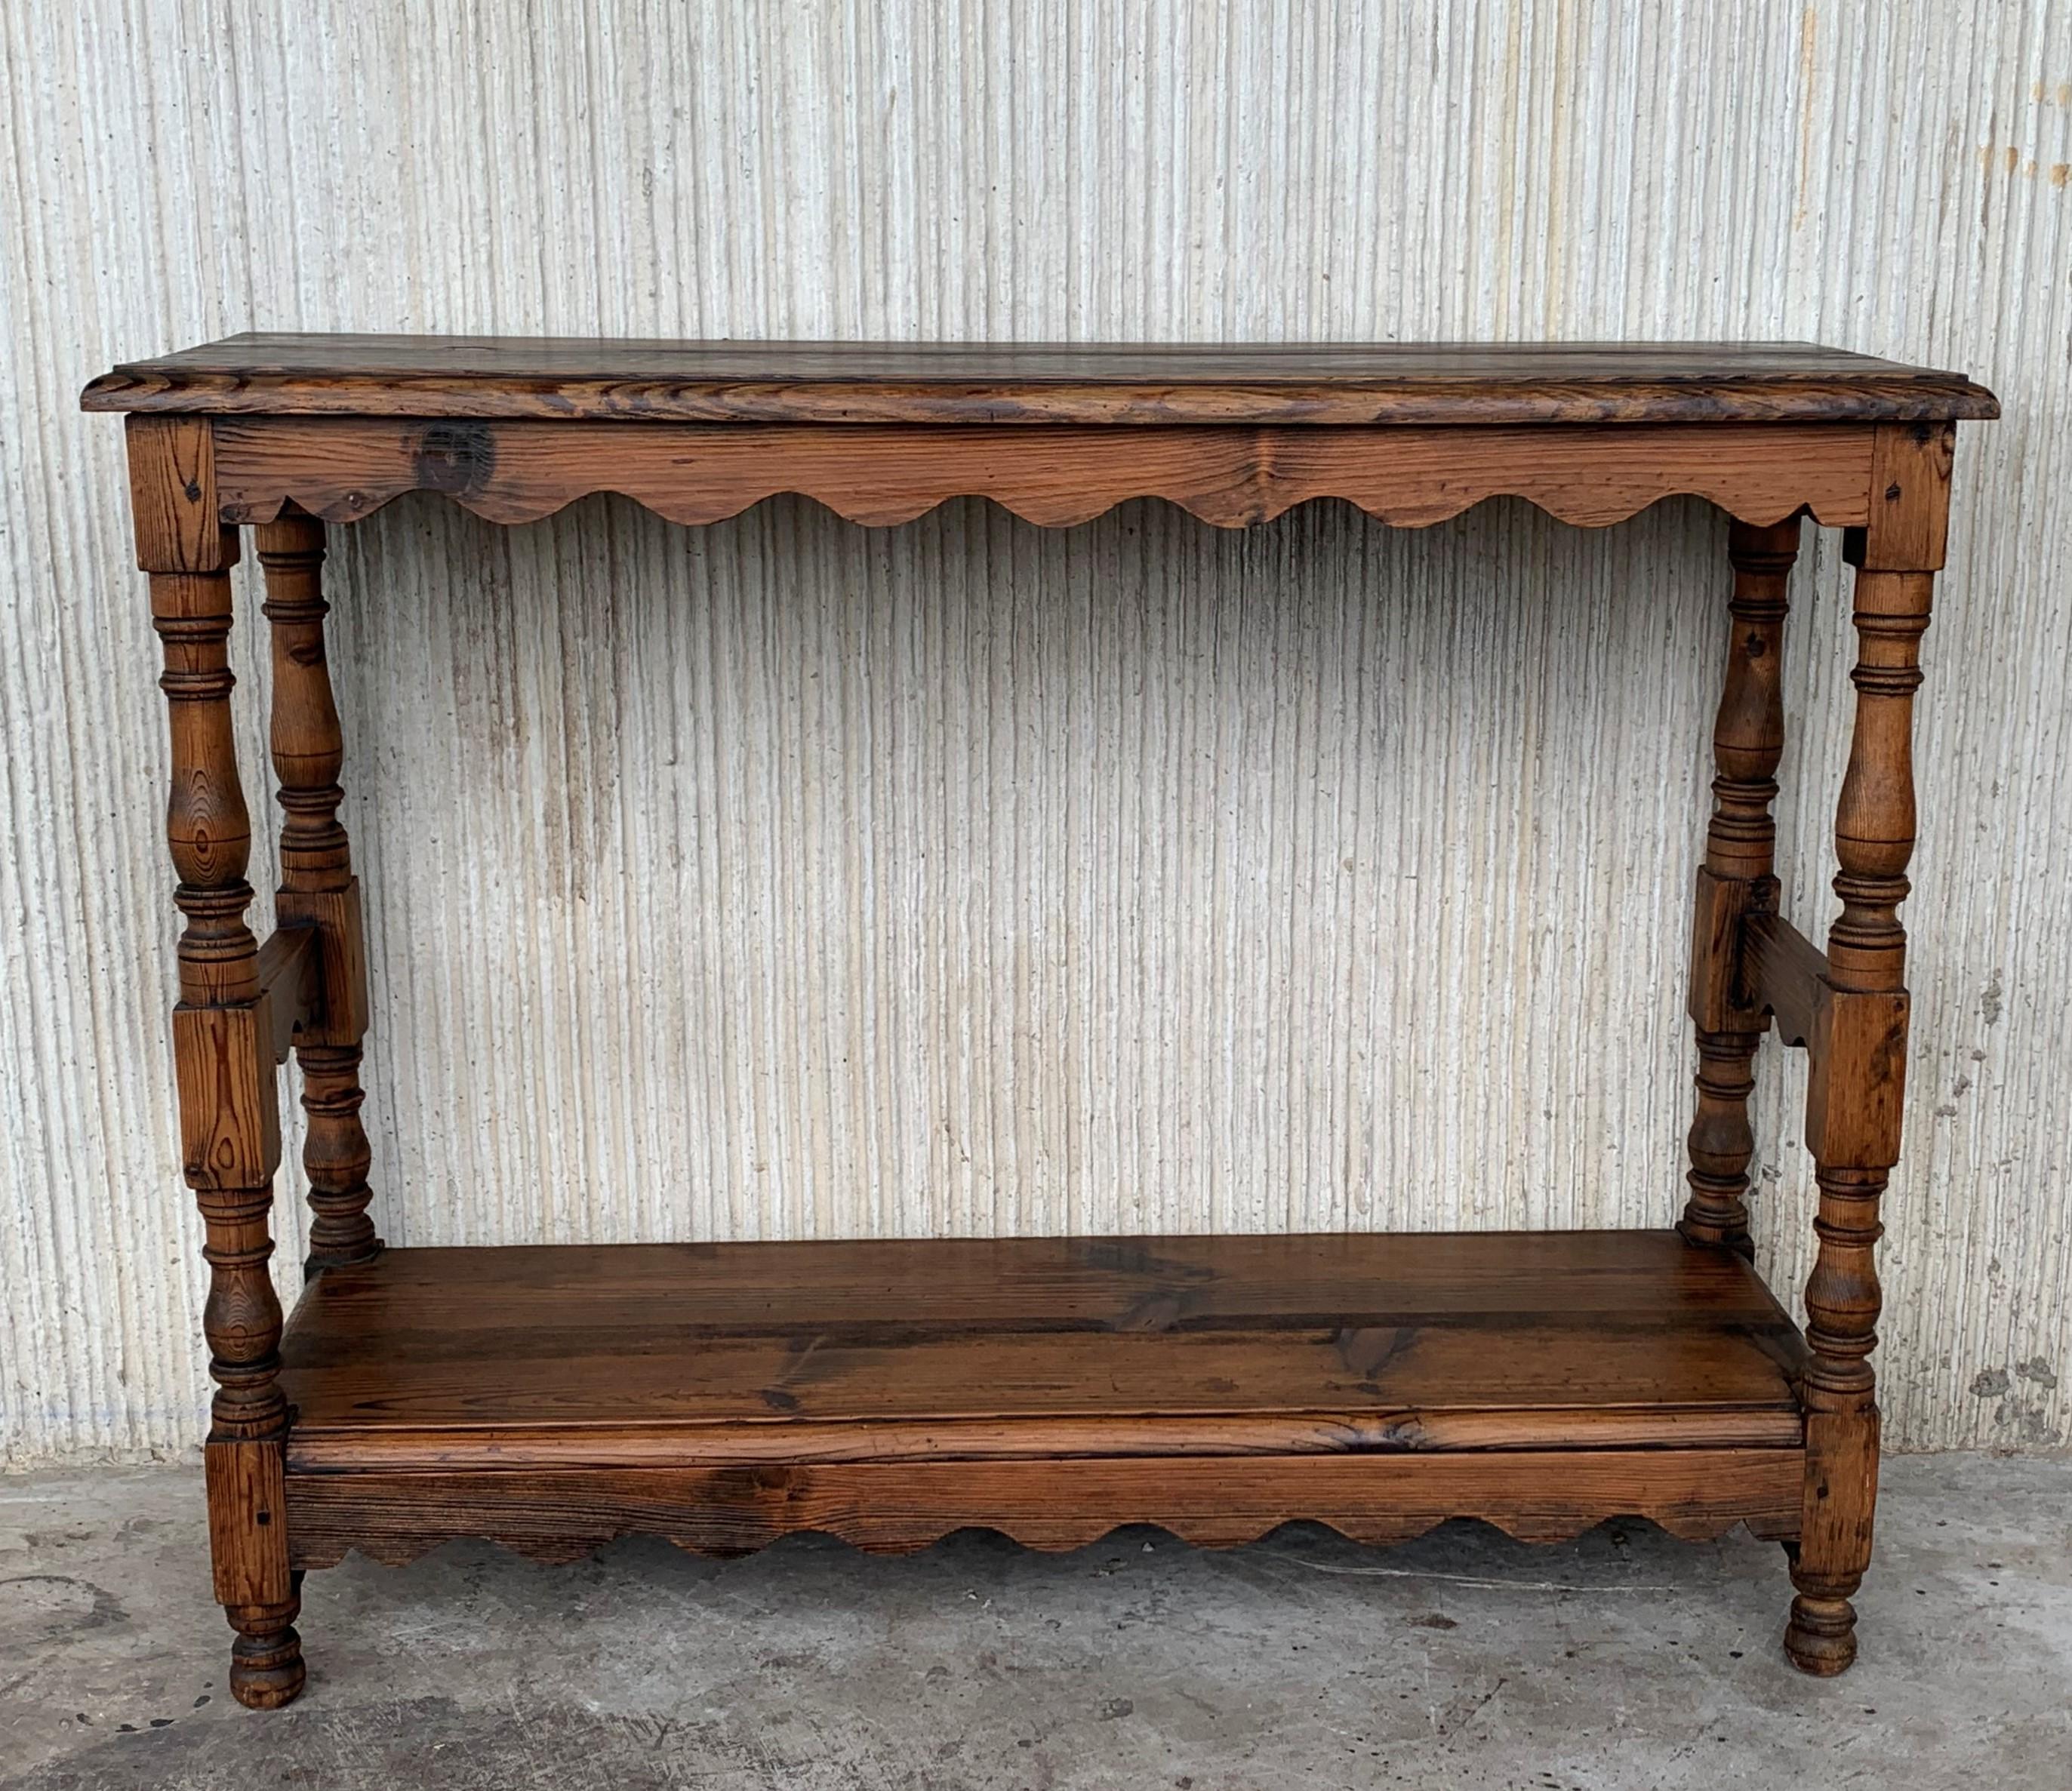 Stunning tall, large and oversized pine wood console or hallway table, circa 1920s. Perfect for the Country style enthusiast or shabby chic lover although, this table would sit very well indeed within any country home decor design.

Measure: